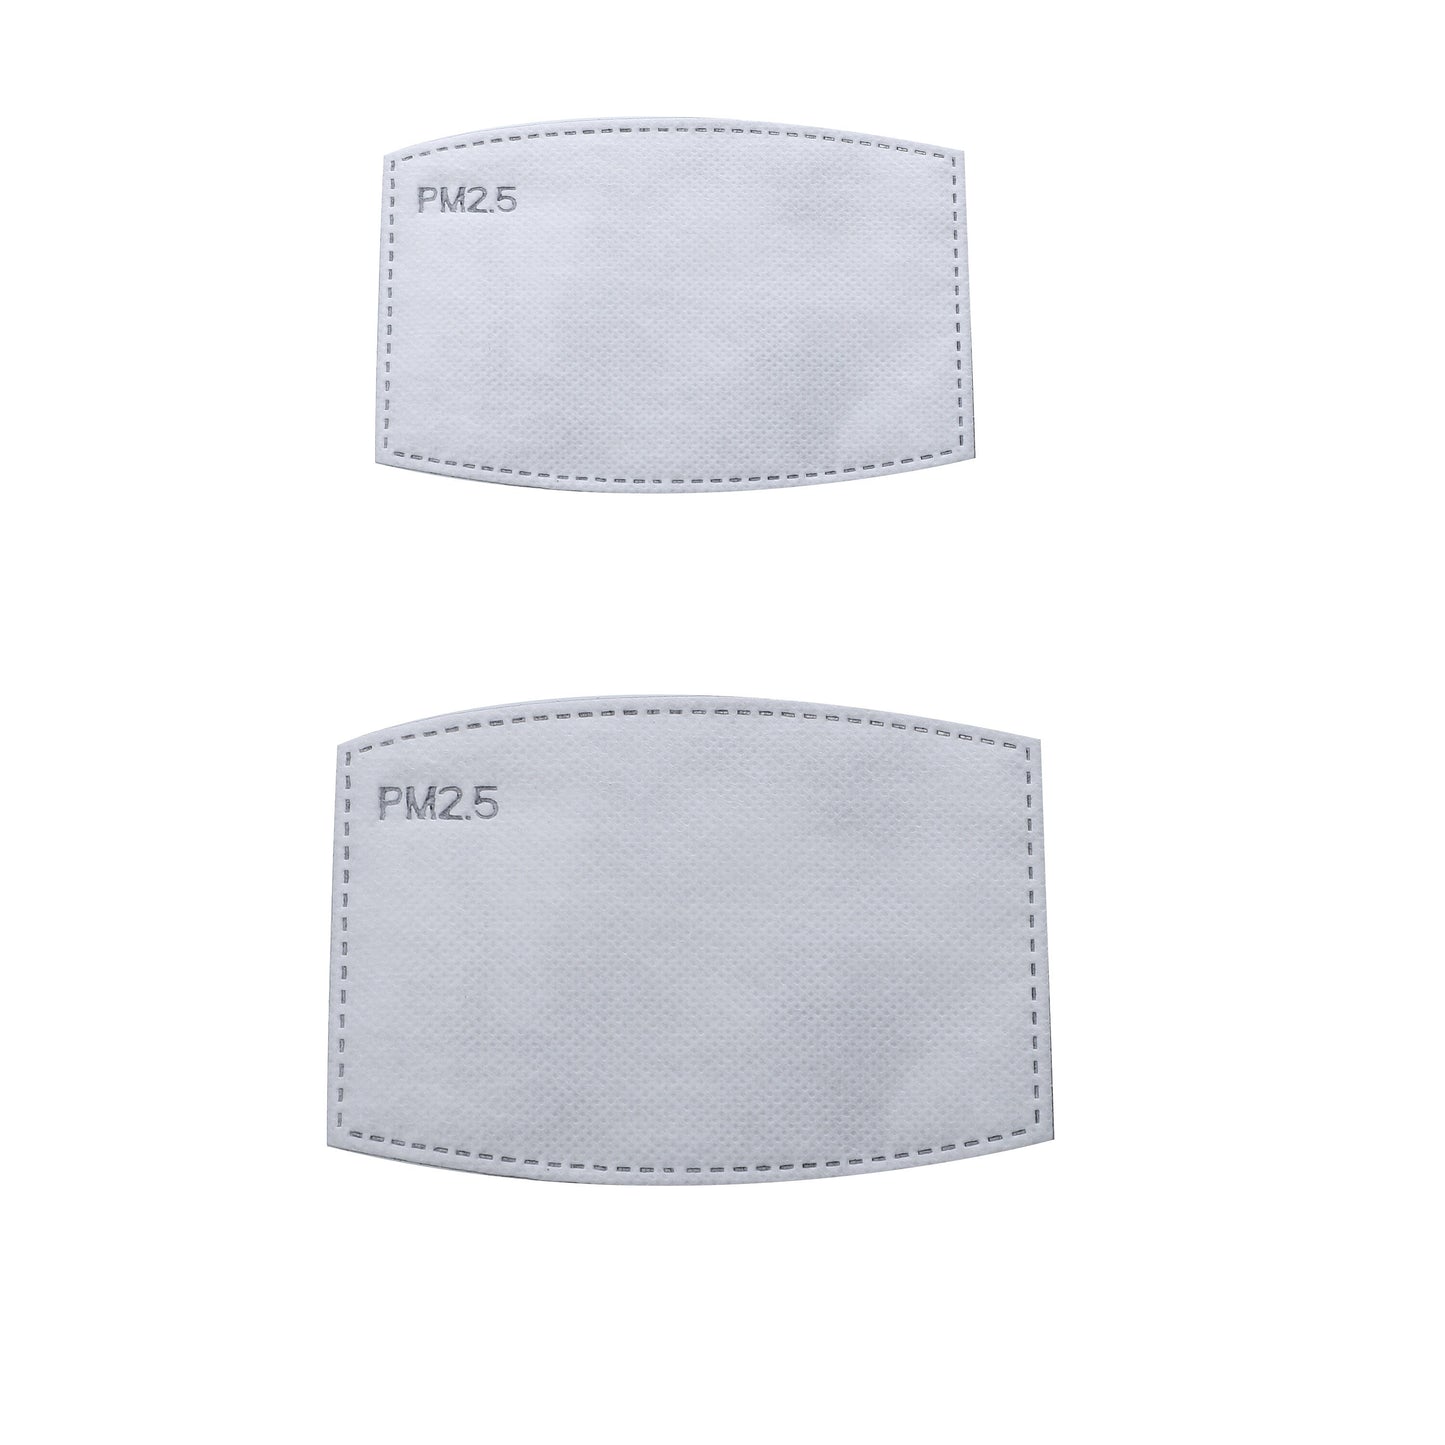 FILTERS for Face Masks Adults and Kids, Carbon Activated Filter Pocket ,Face Mask Filter